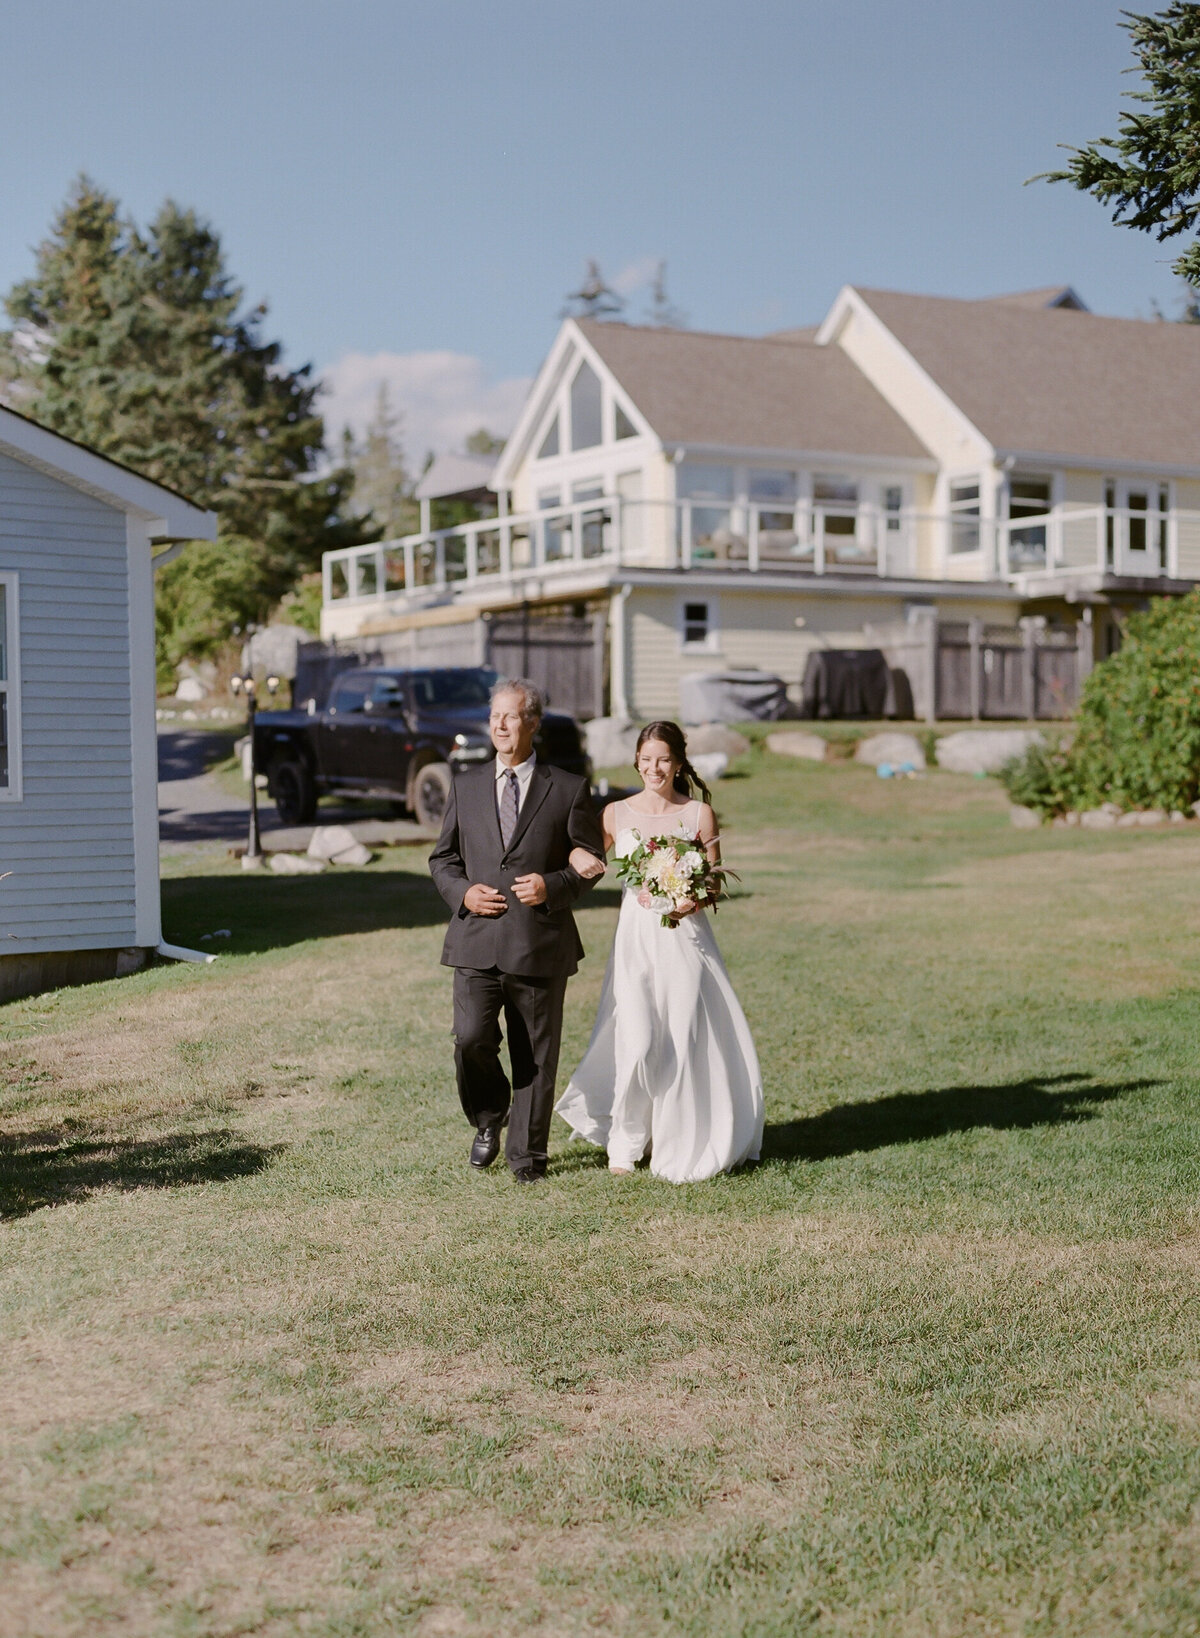 Jacqueline Anne Photography - Halifax Wedding Photographer - Jaclyn and Morgan-40